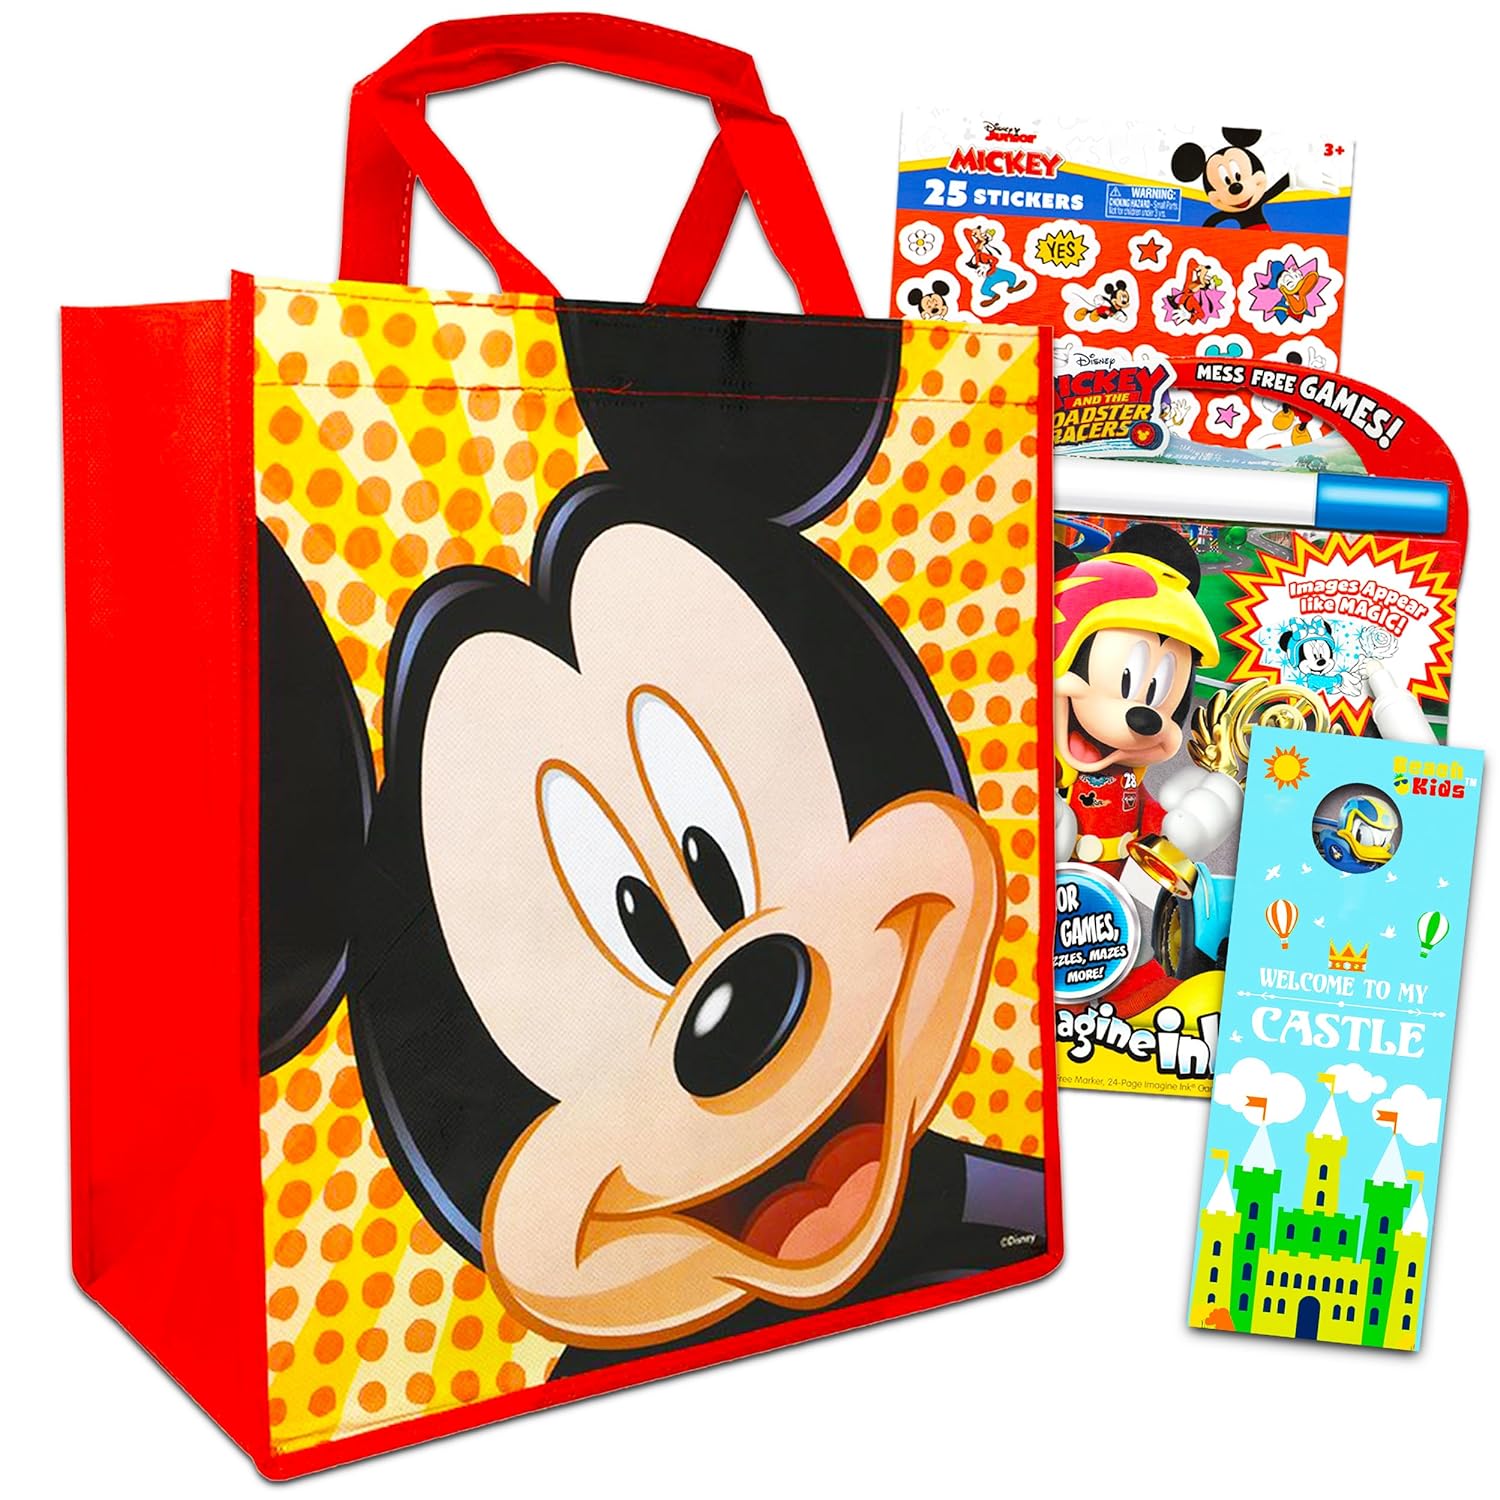 Great Choice Products Disney Mickey Mouse Travel Bag Bundle 4 Pack Mickey Mouse Activity Set - Mickey Mouse Travel Set With Coloring Books, Game